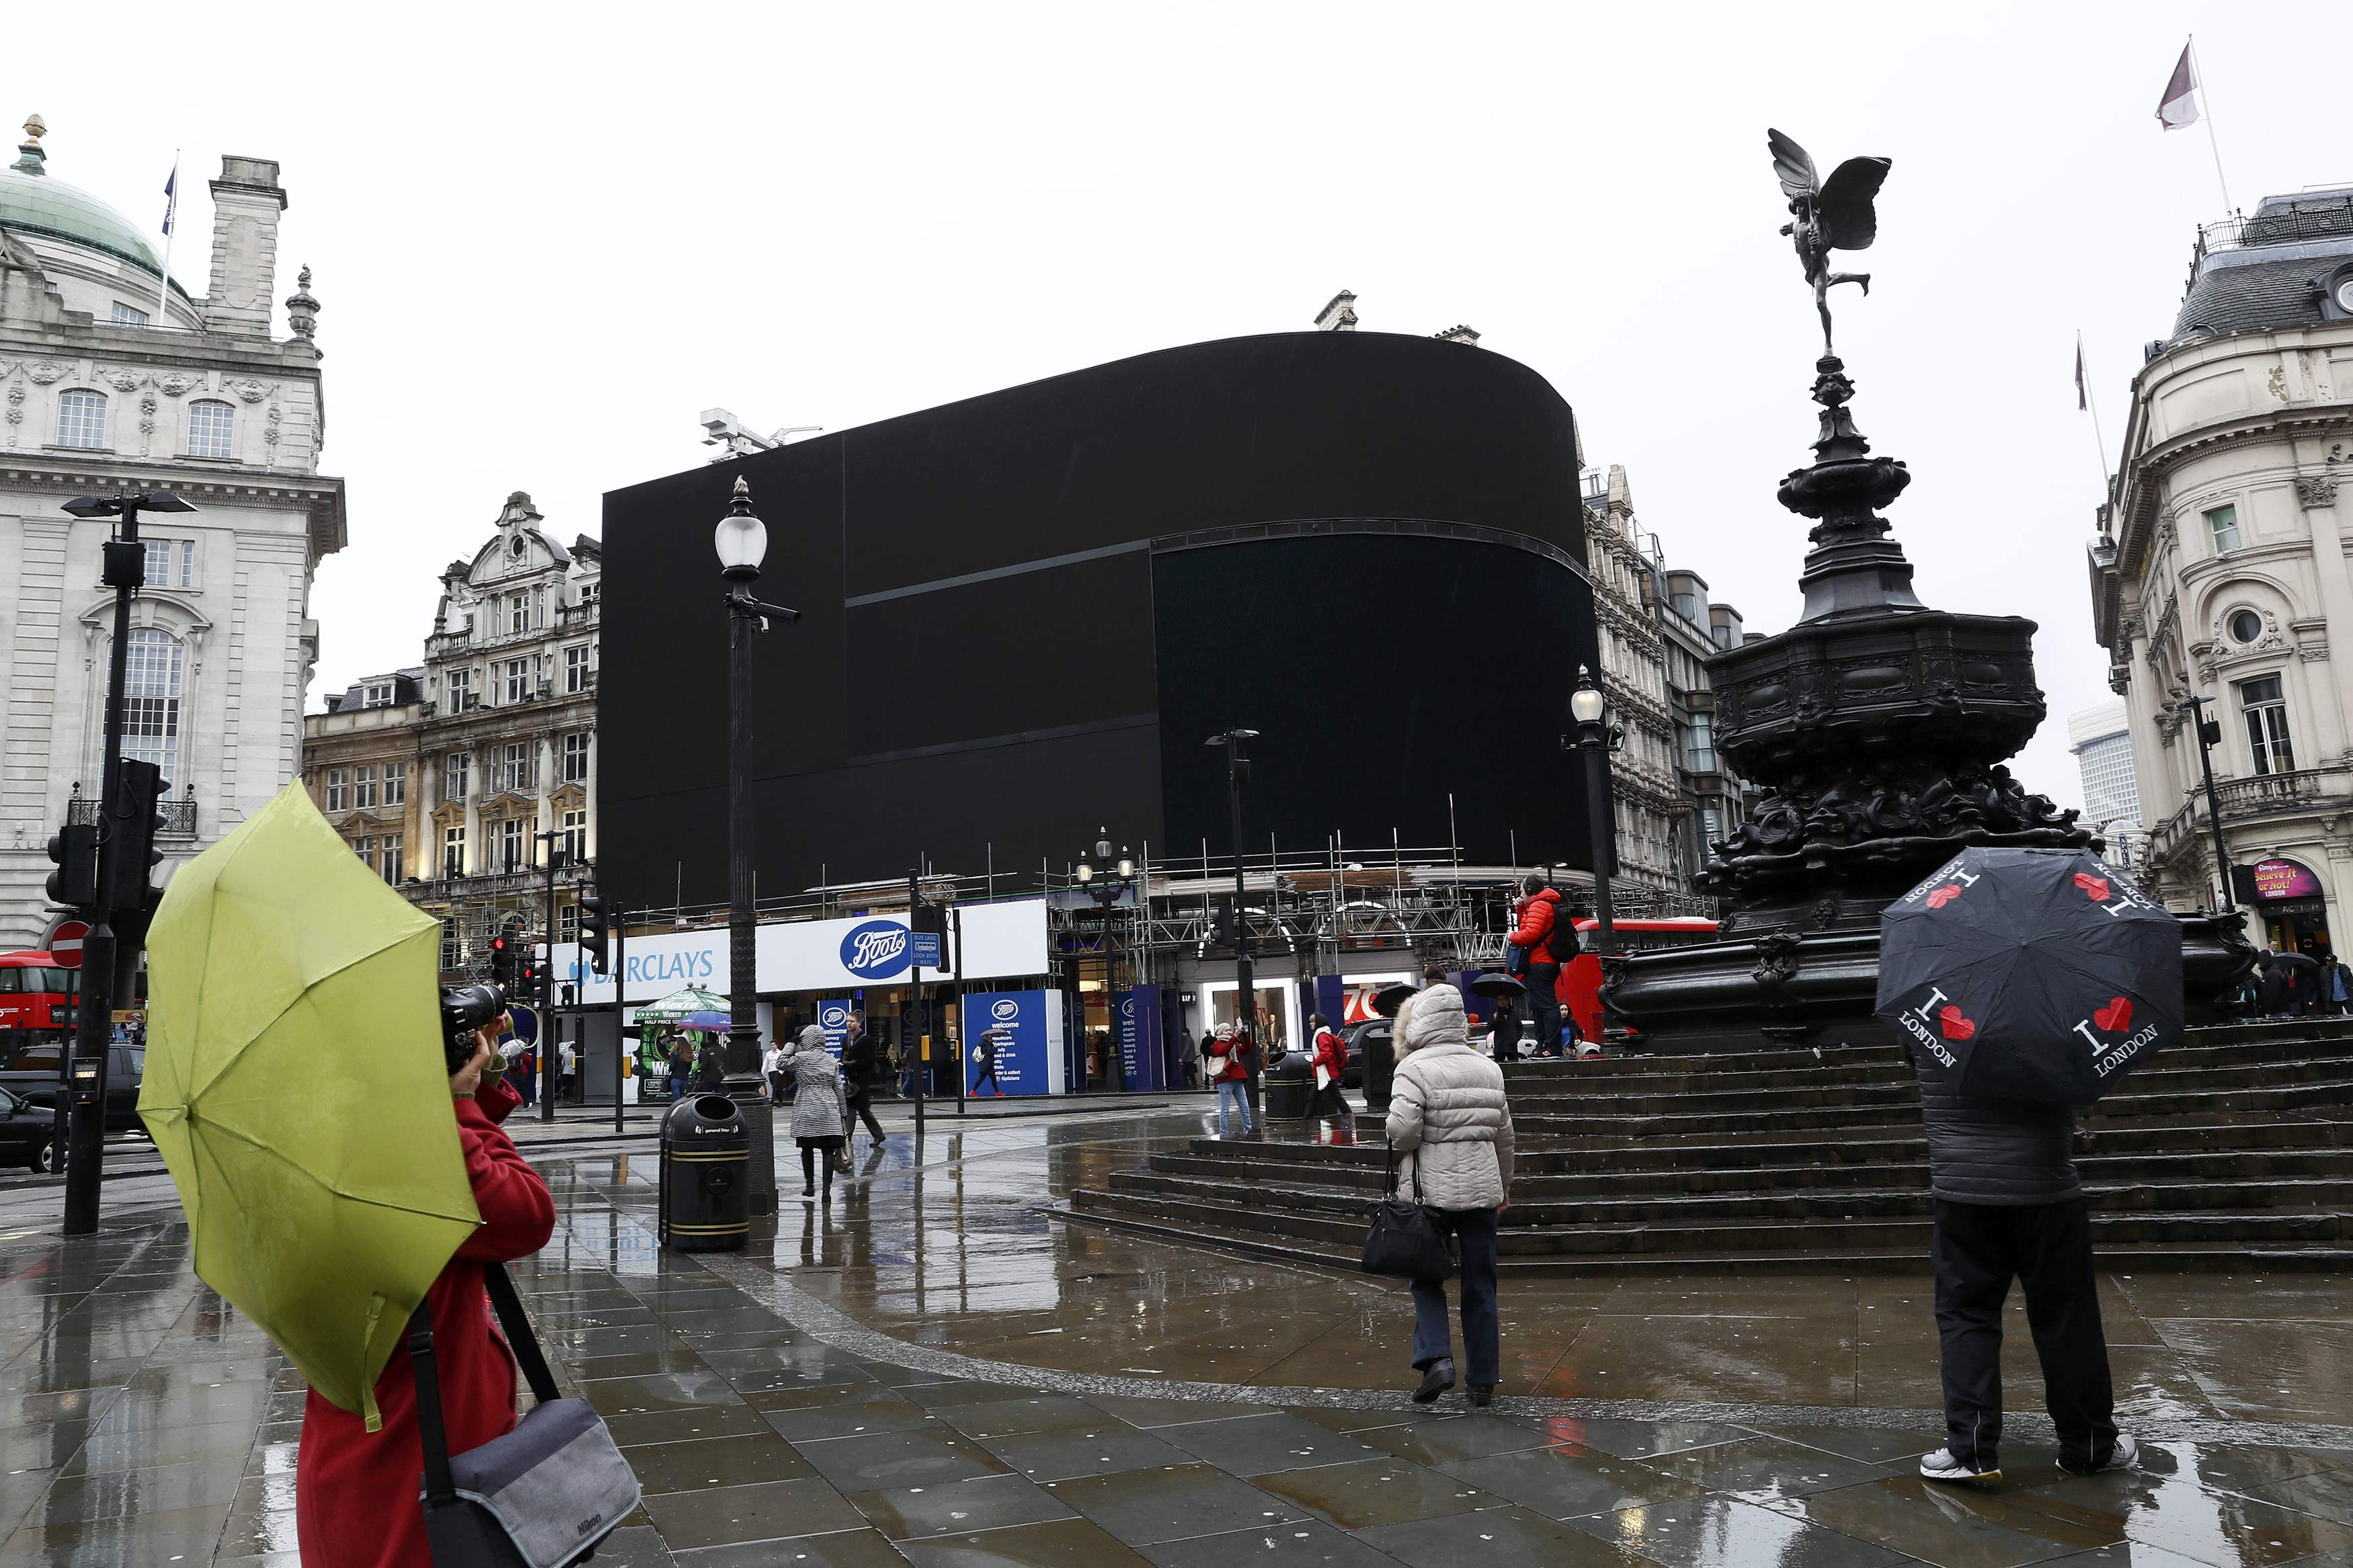 London's Piccadilly Circus lights go off for longest since World War II